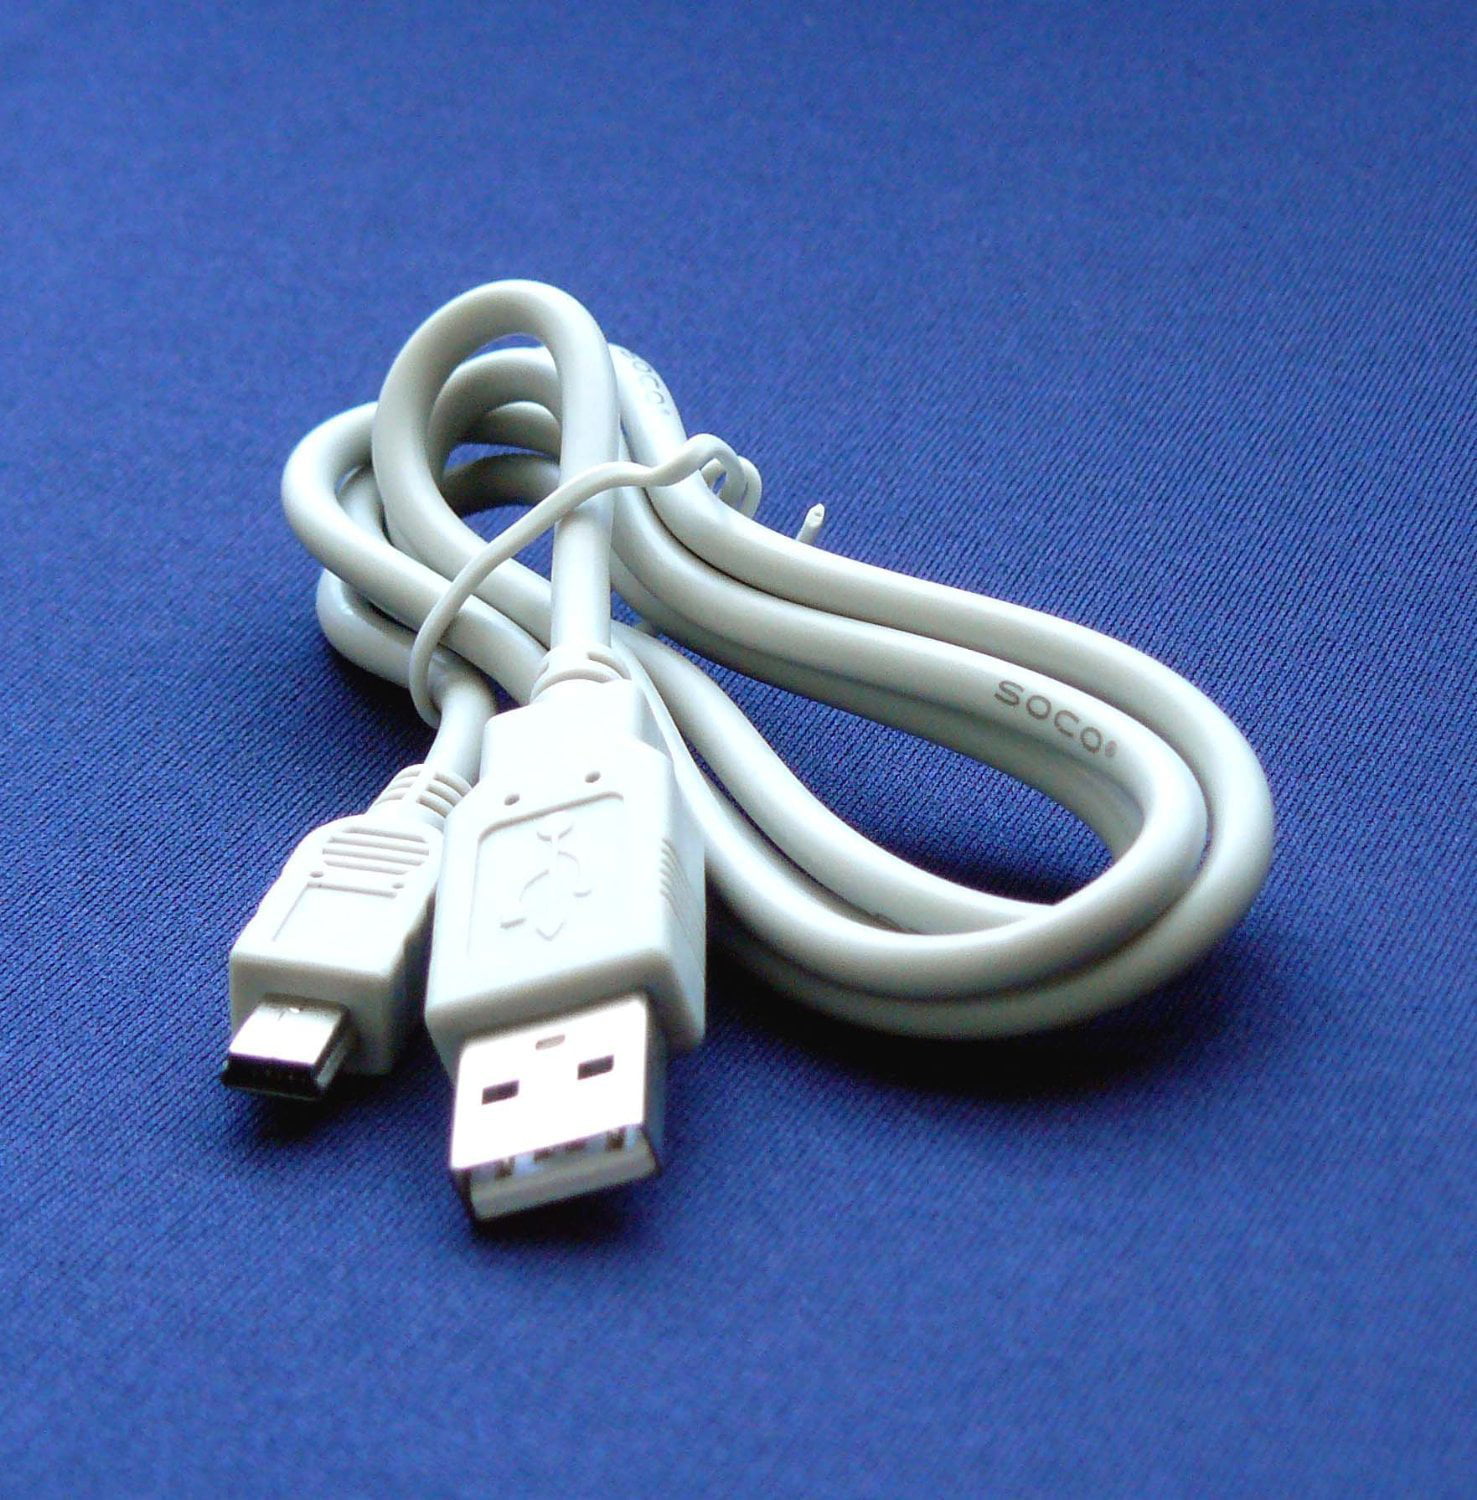 Canon PowerShot HS & SX260HS Digital Camera USB 2.0 Cable Cord - IFC-400PCU & IFC-300PCU Model - 2.5 feet White -, Compatible.., By Bargains Depot Ship from US - Walmart.com